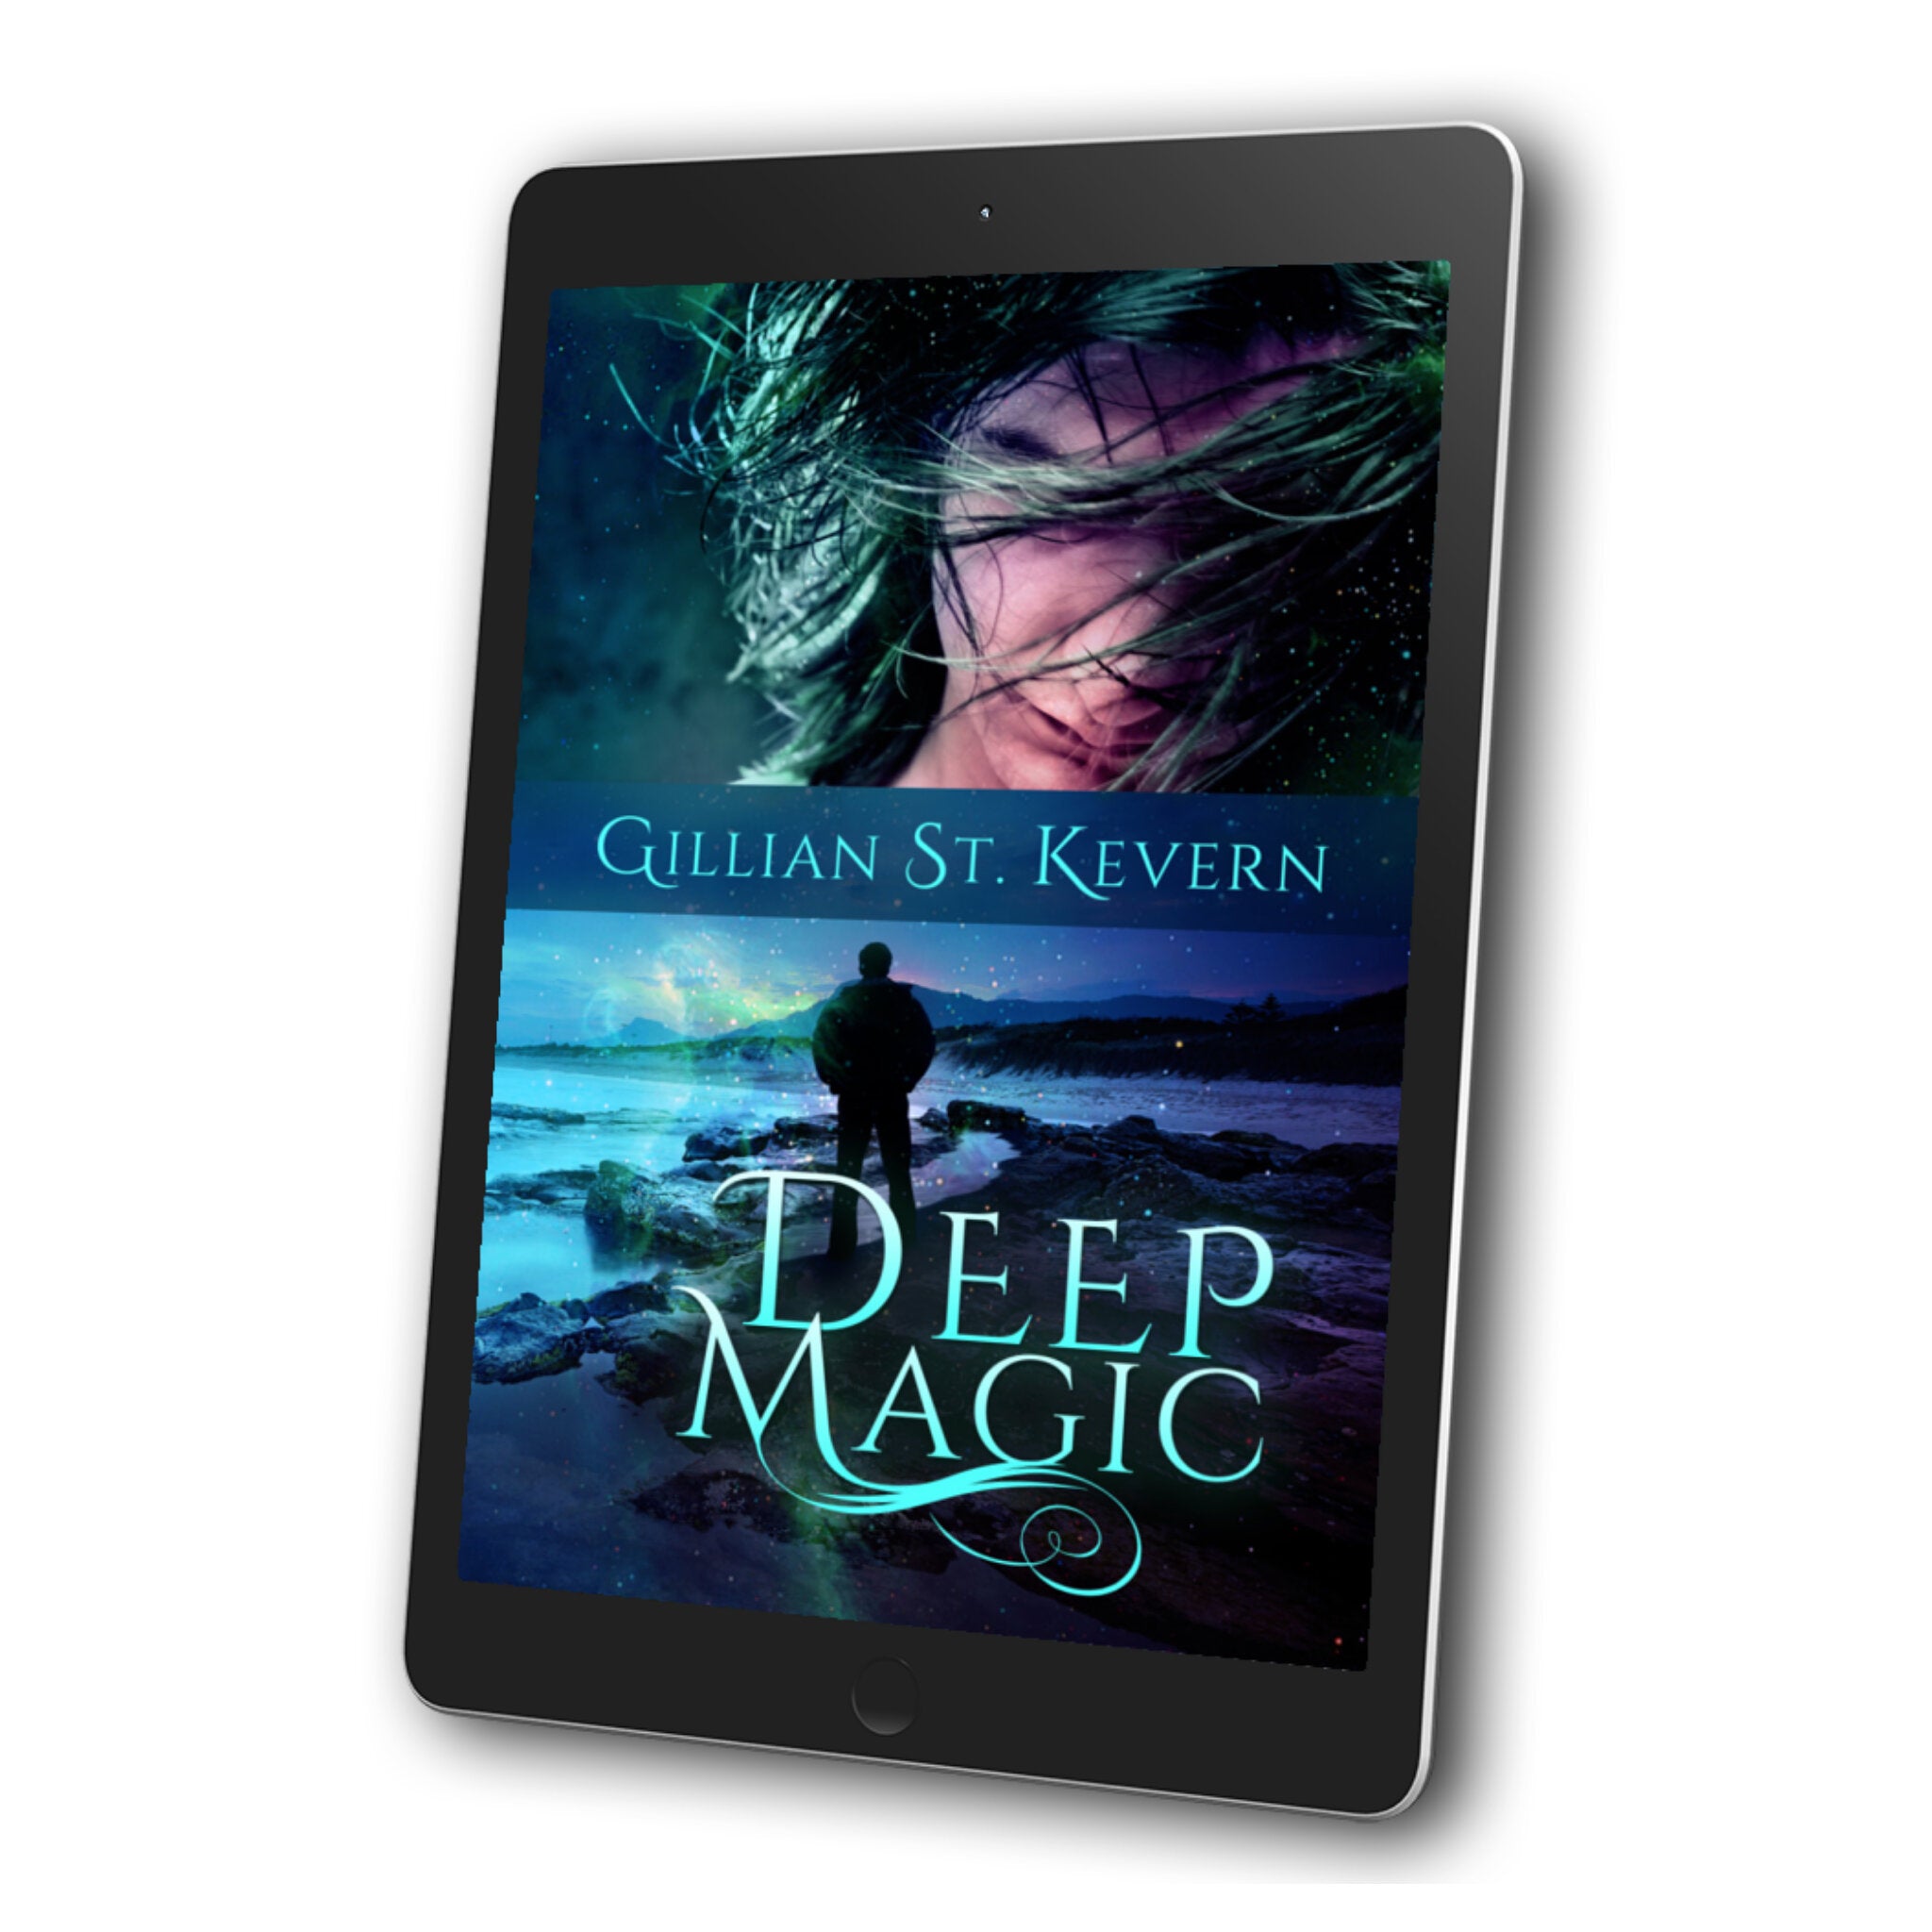 Cover of Deep Magic, a gay romance with mythological elements: The cover is divided in two halves. The top half features a dark haired man smiling enigmatically, his hair swept across his face. The bottom half features a man in silhouette, standing on the rocky Welsh coast, a wave splashing up before him.